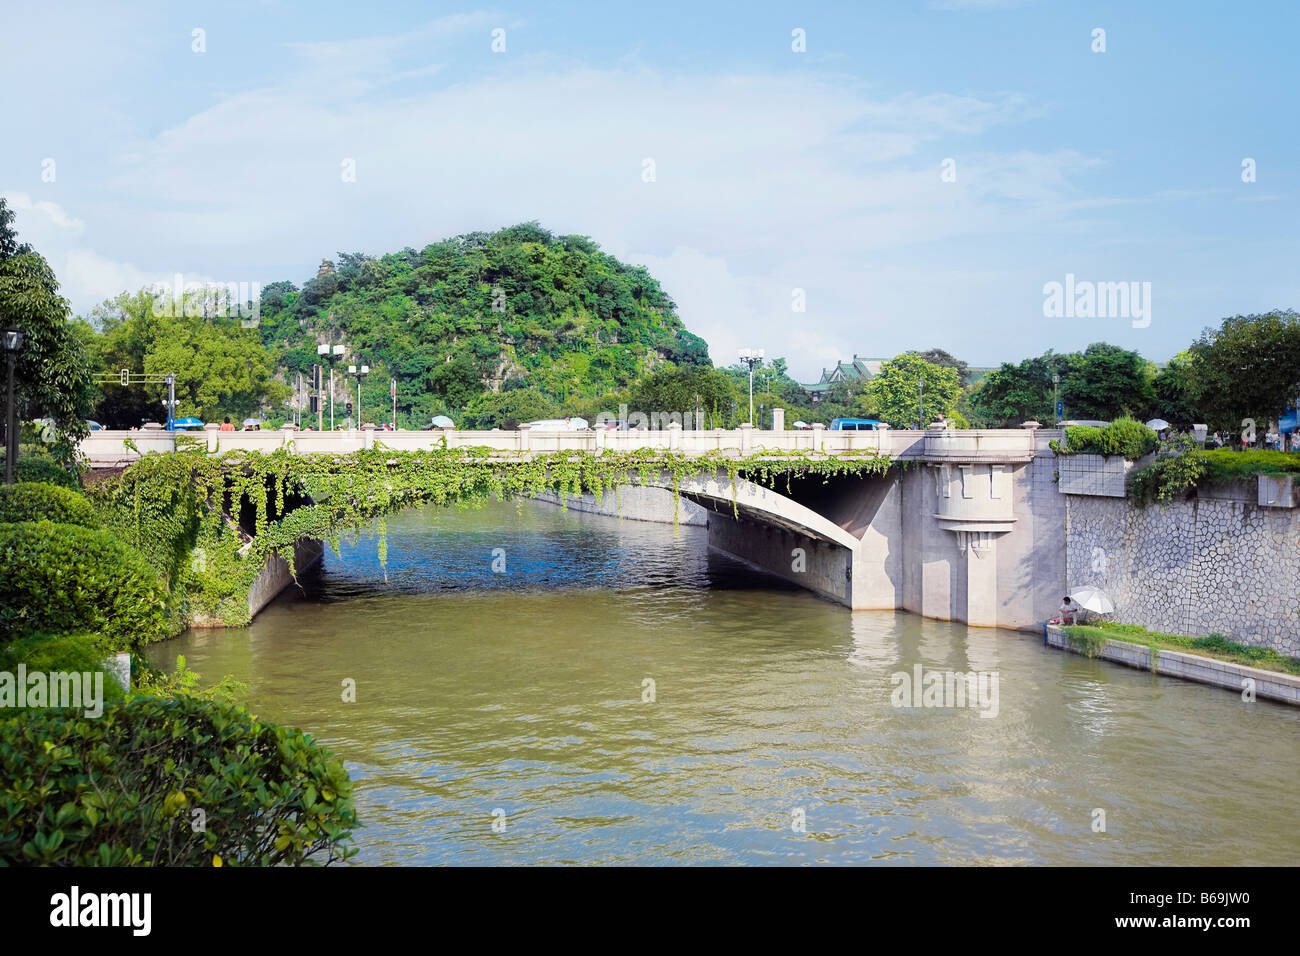 Bridge over a river, Guilin, Guangxi Province, China Stock Photo